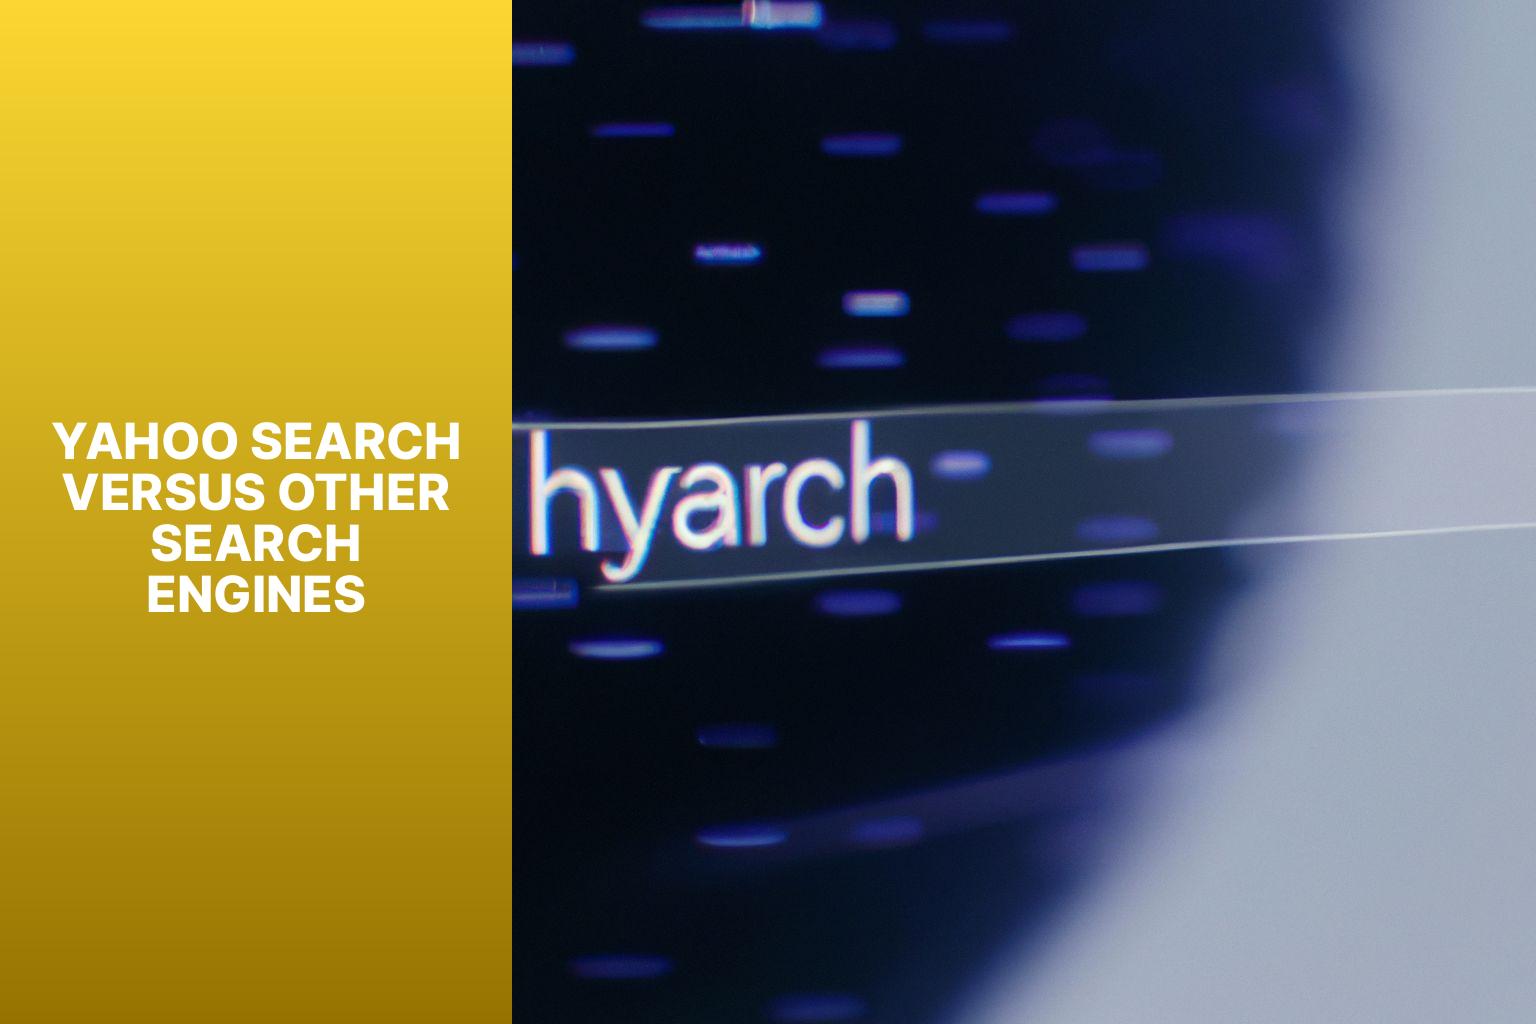 Yahoo Search versus Other Search Engines - Understanding Yahoo Search Results 